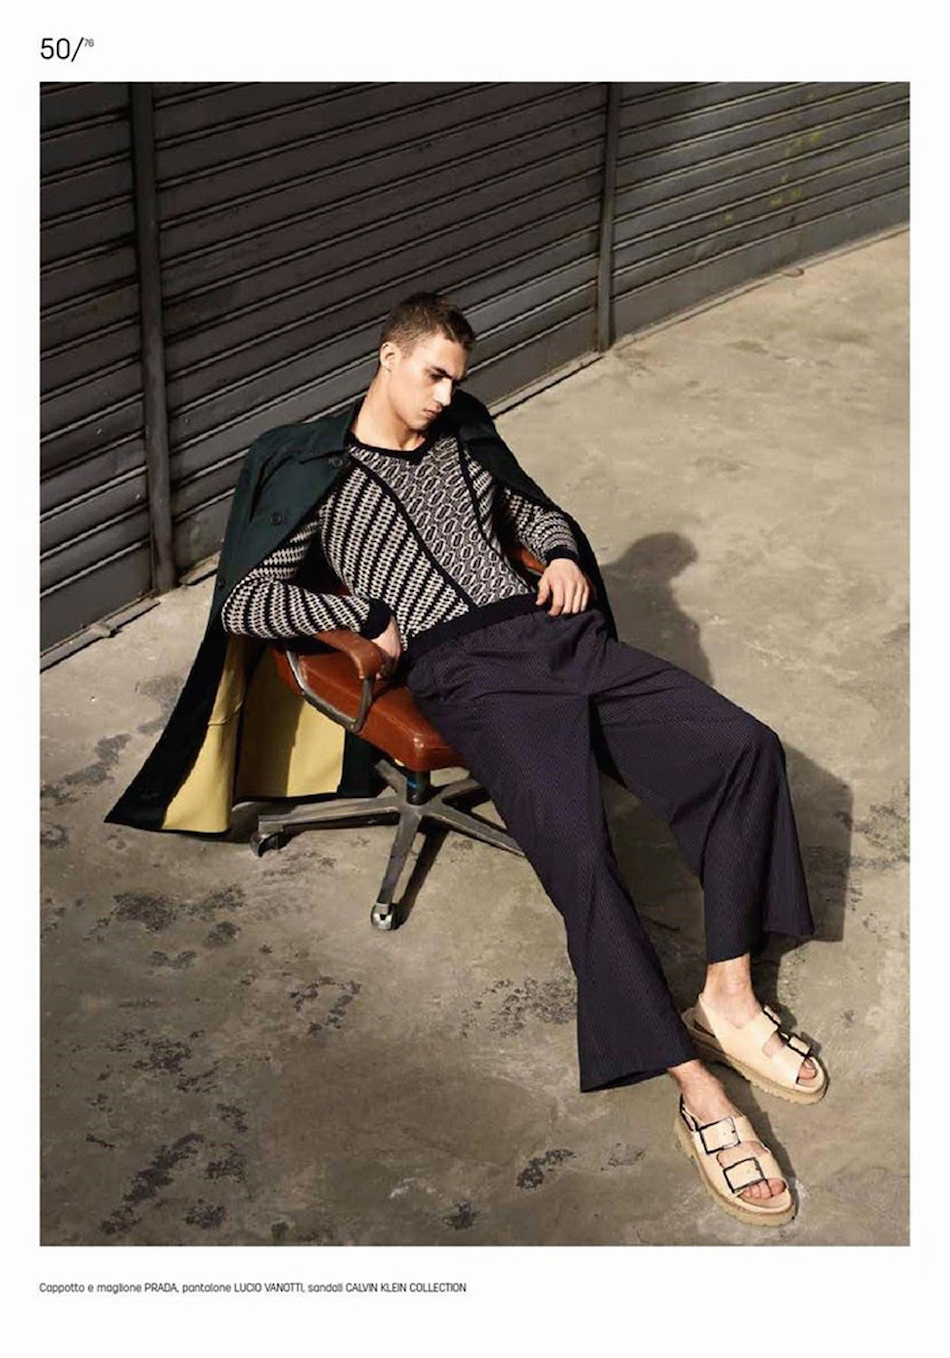 Alessio Pozzi Models Relaxed Menswear Styles for Urban Cover Shoot ...